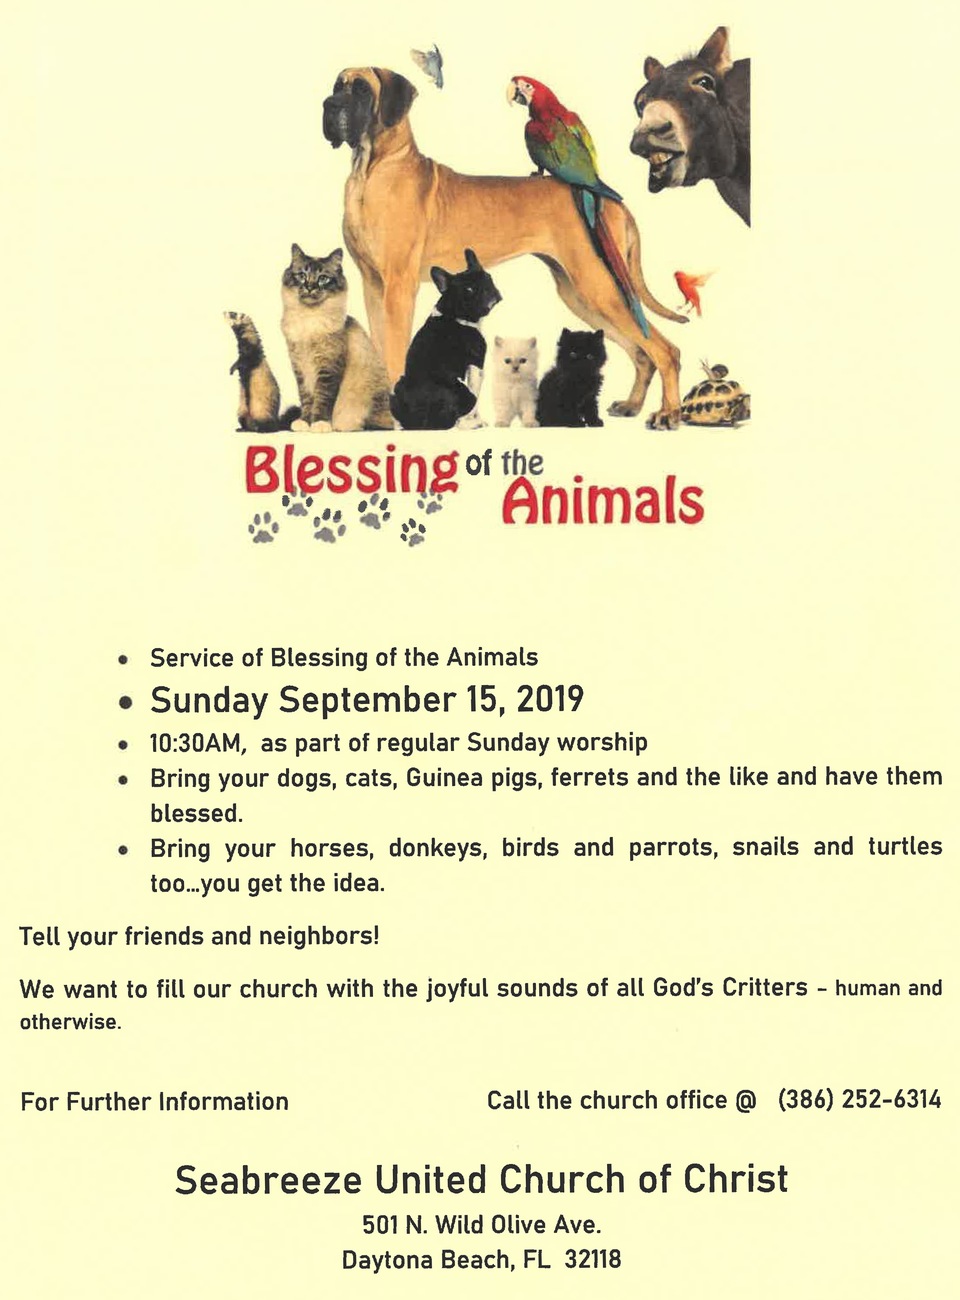 Looking to get your pets blessed?